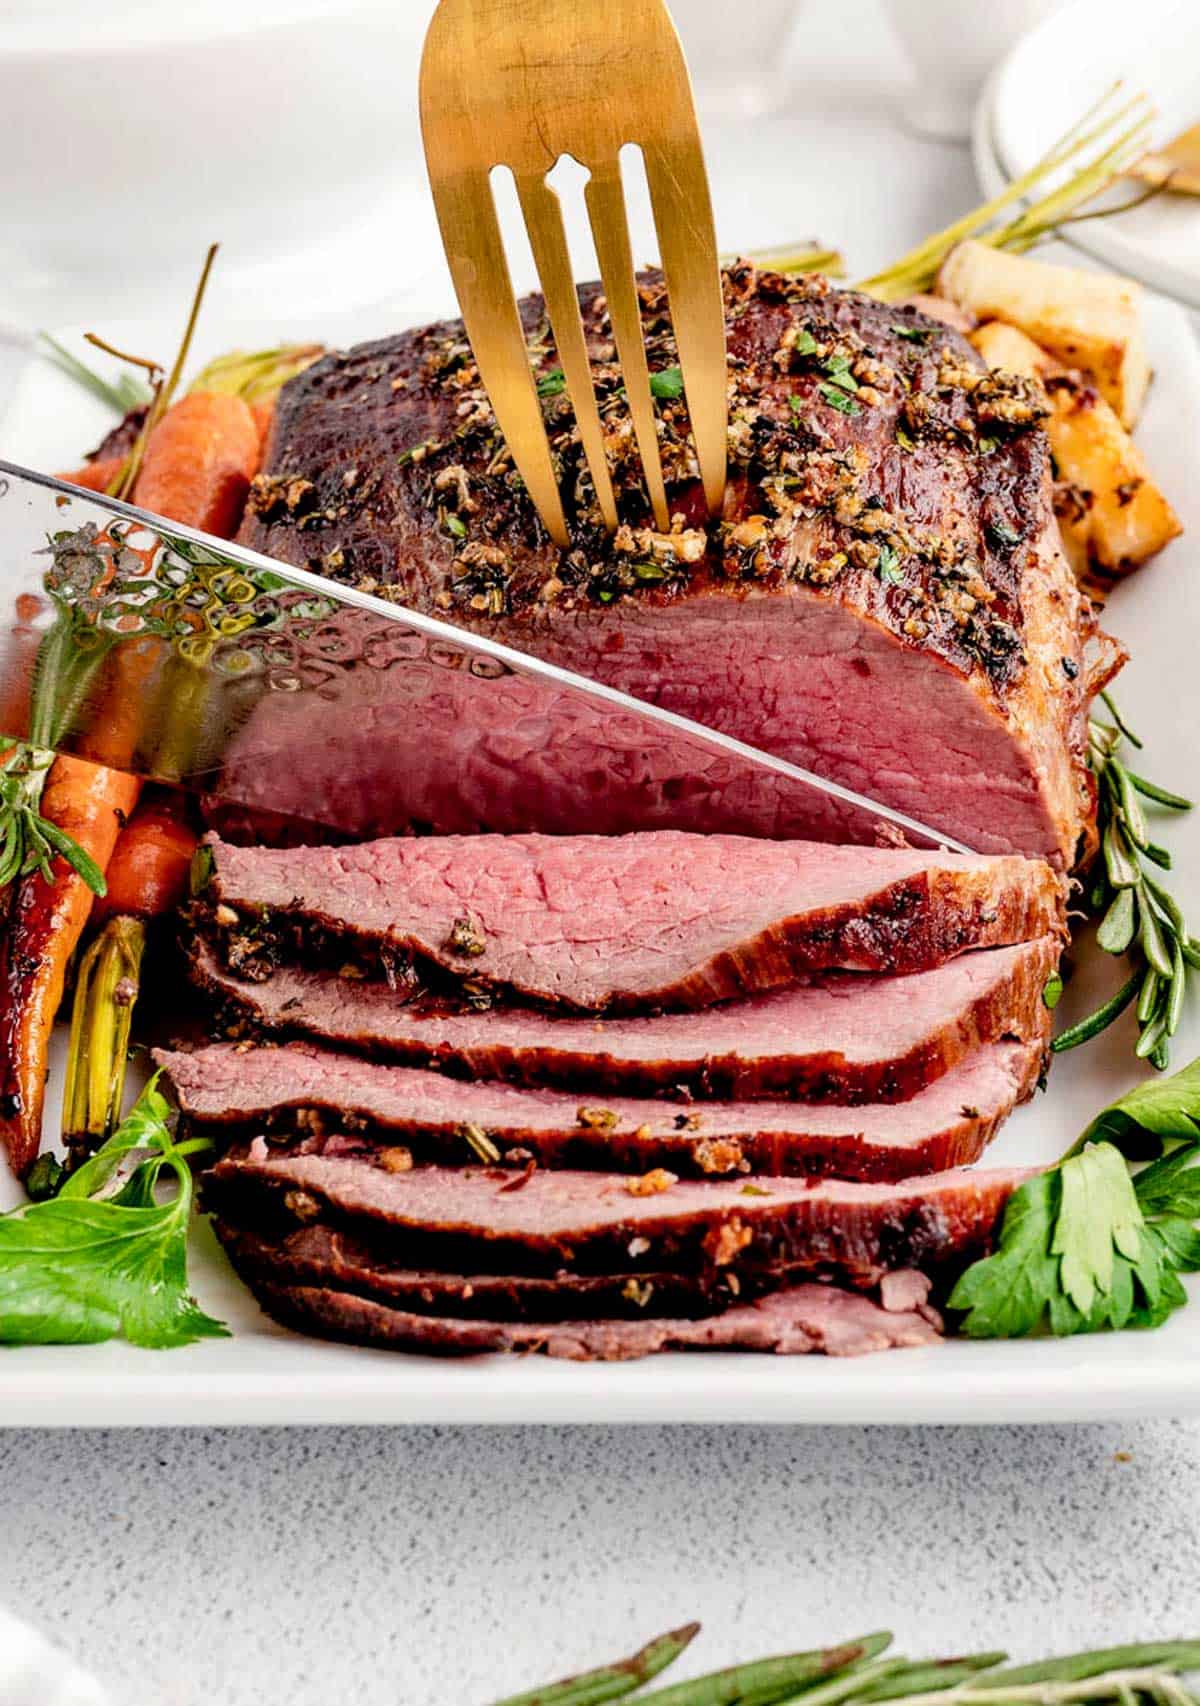 A serving fork securing the holiday roast beef, while a knife carves a slice of roast beef.